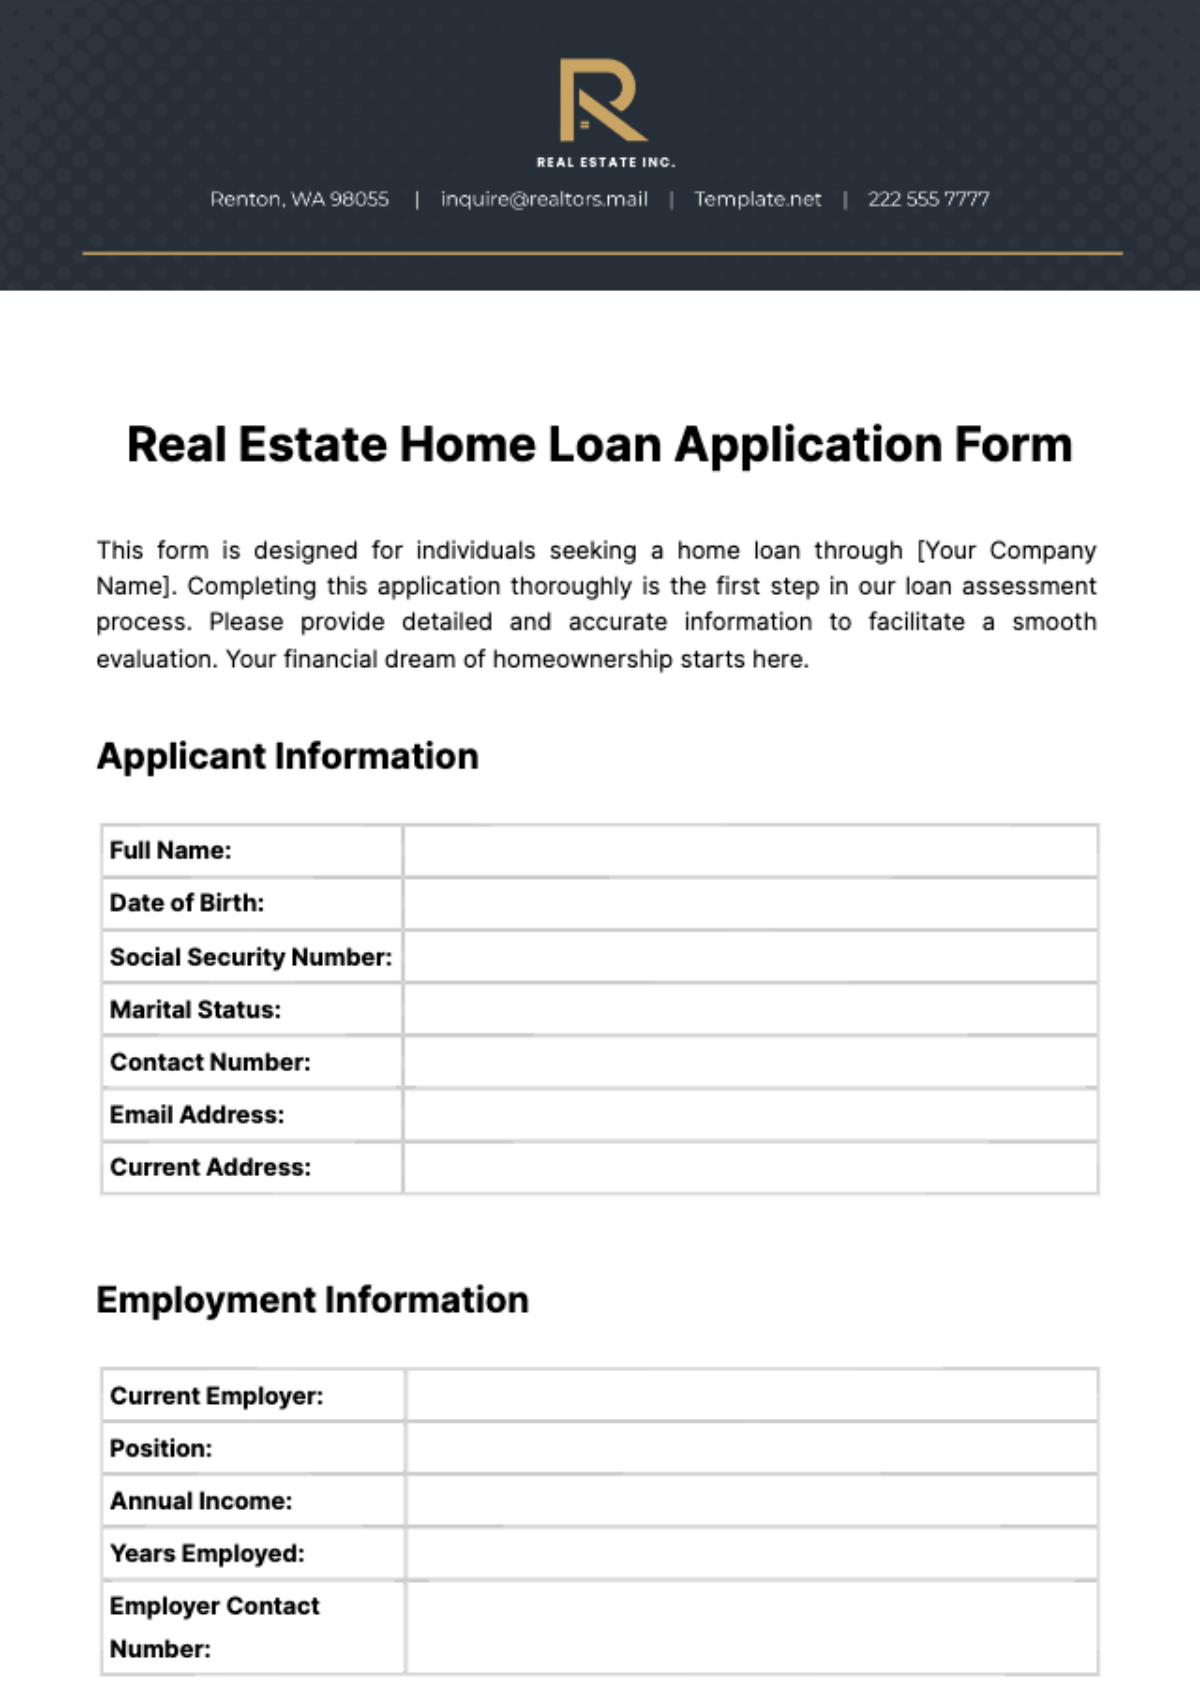 Real Estate Home Loan Application Form Template